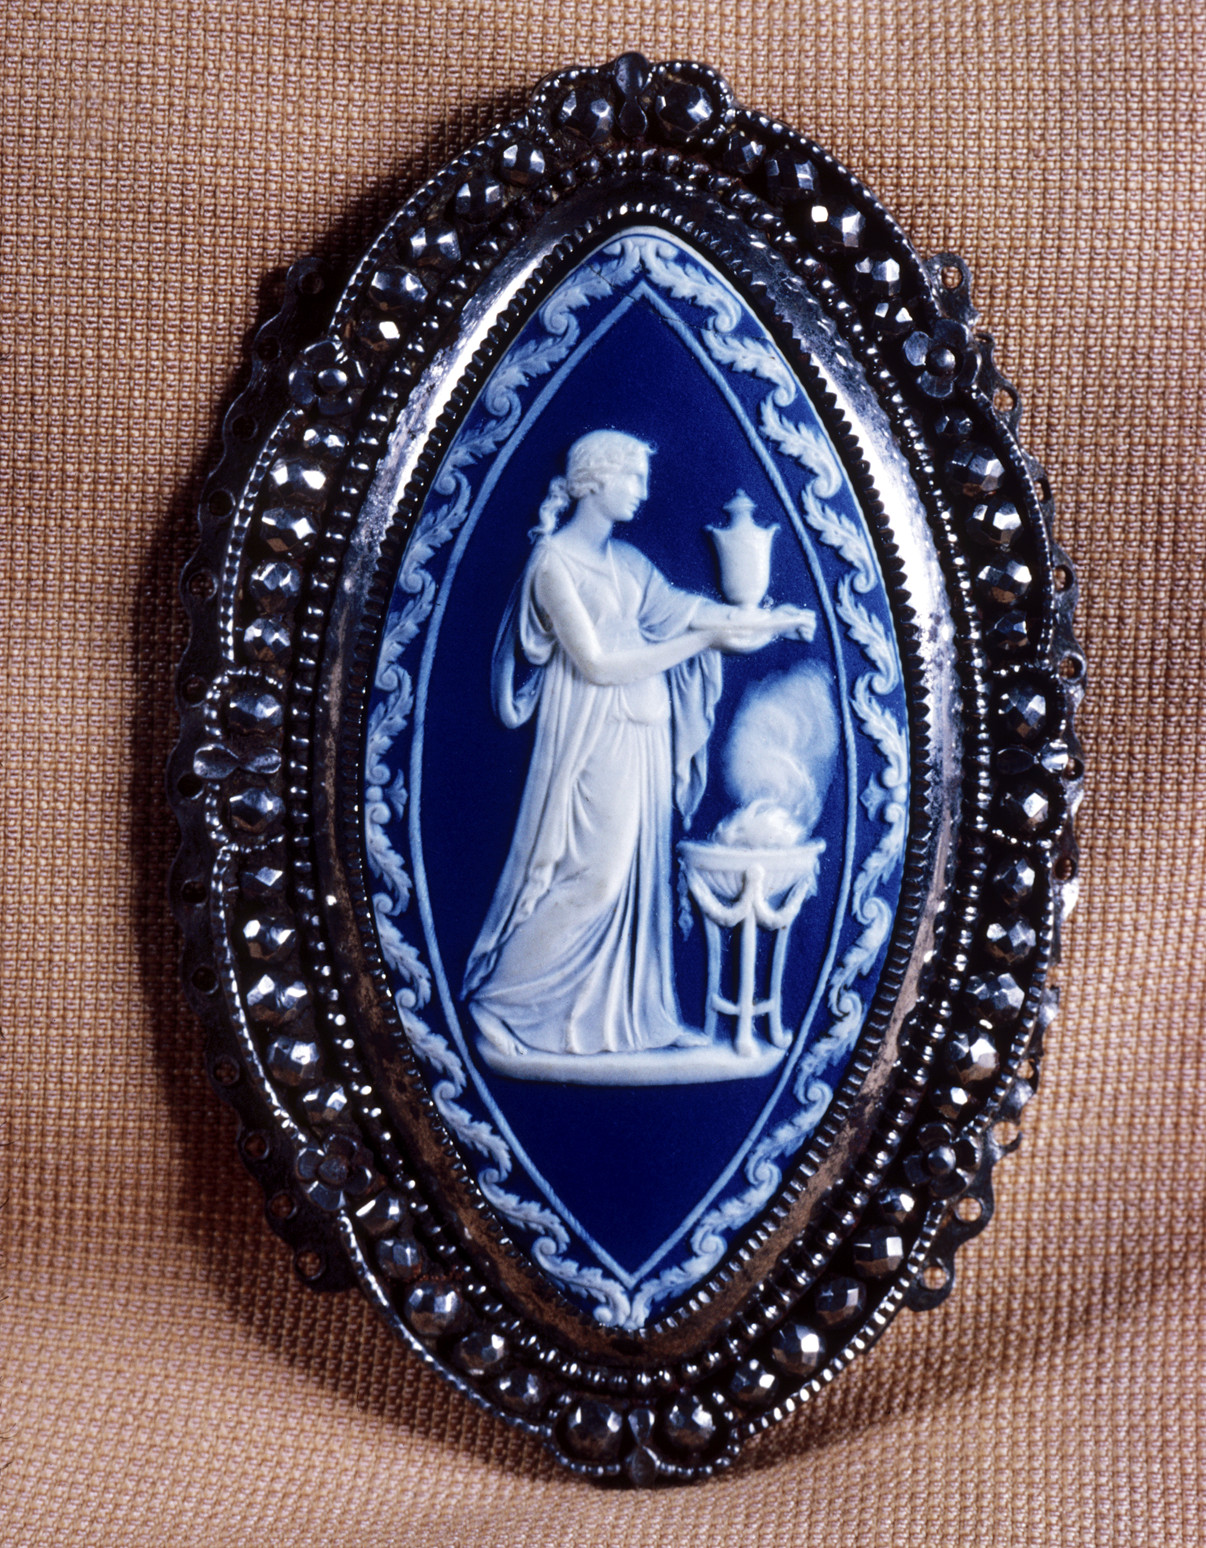 c. 1790. Belt Clasp with a Female Making a Sacrifice. Josiah Wedgwood with metal frame by Matthew Boulton. Credit Walters Art Museum